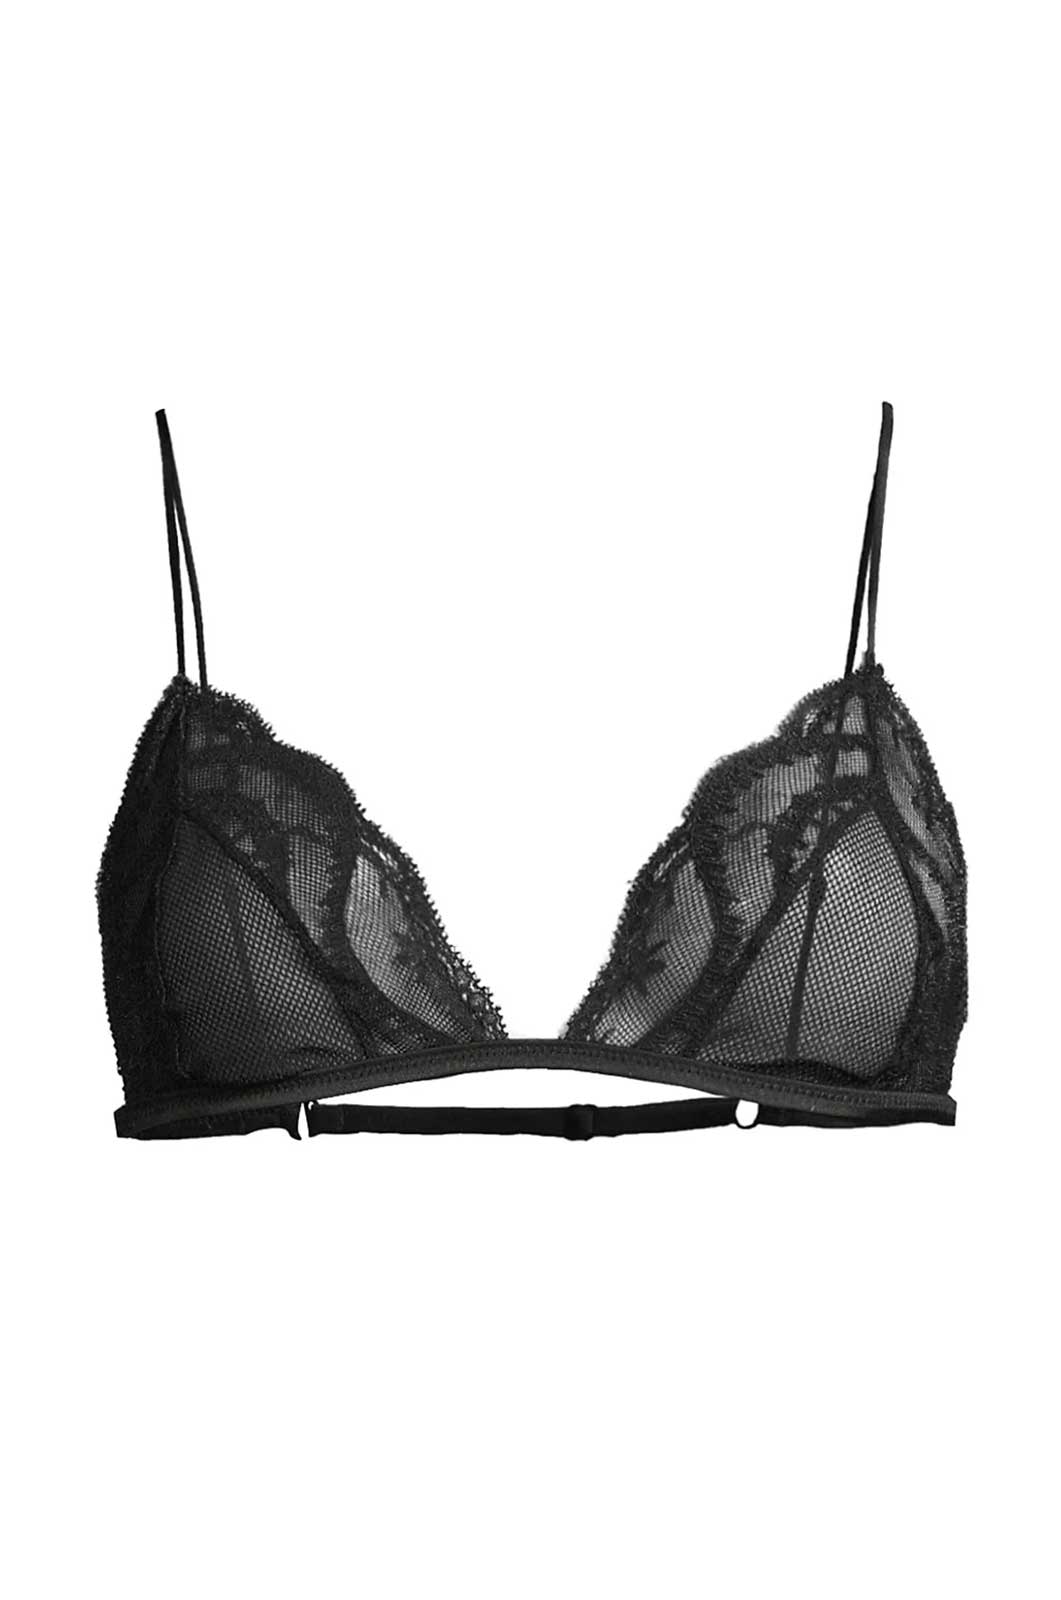 French lace triangle bra sheer scalloped detail thin straps 